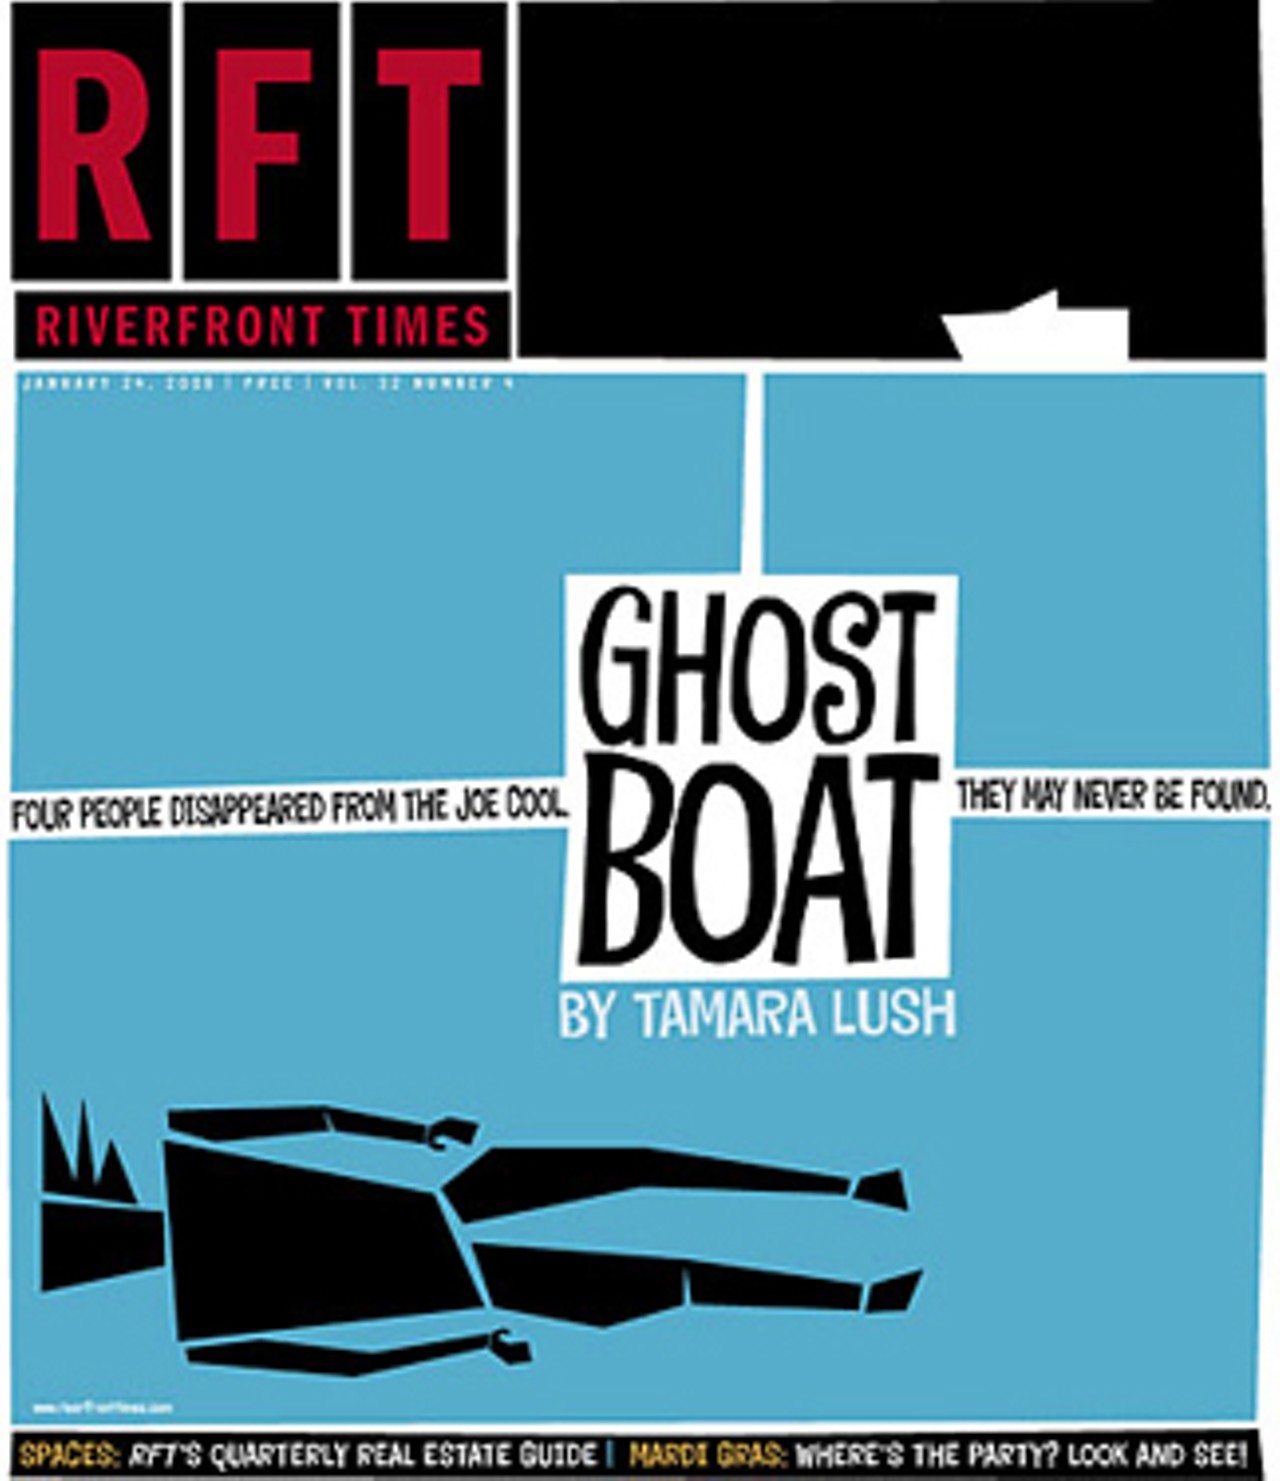 Ghost Boat told the true story of four people who disappeared from the Joe Cool. They have yet to be found. By Tamara Lush. January 24